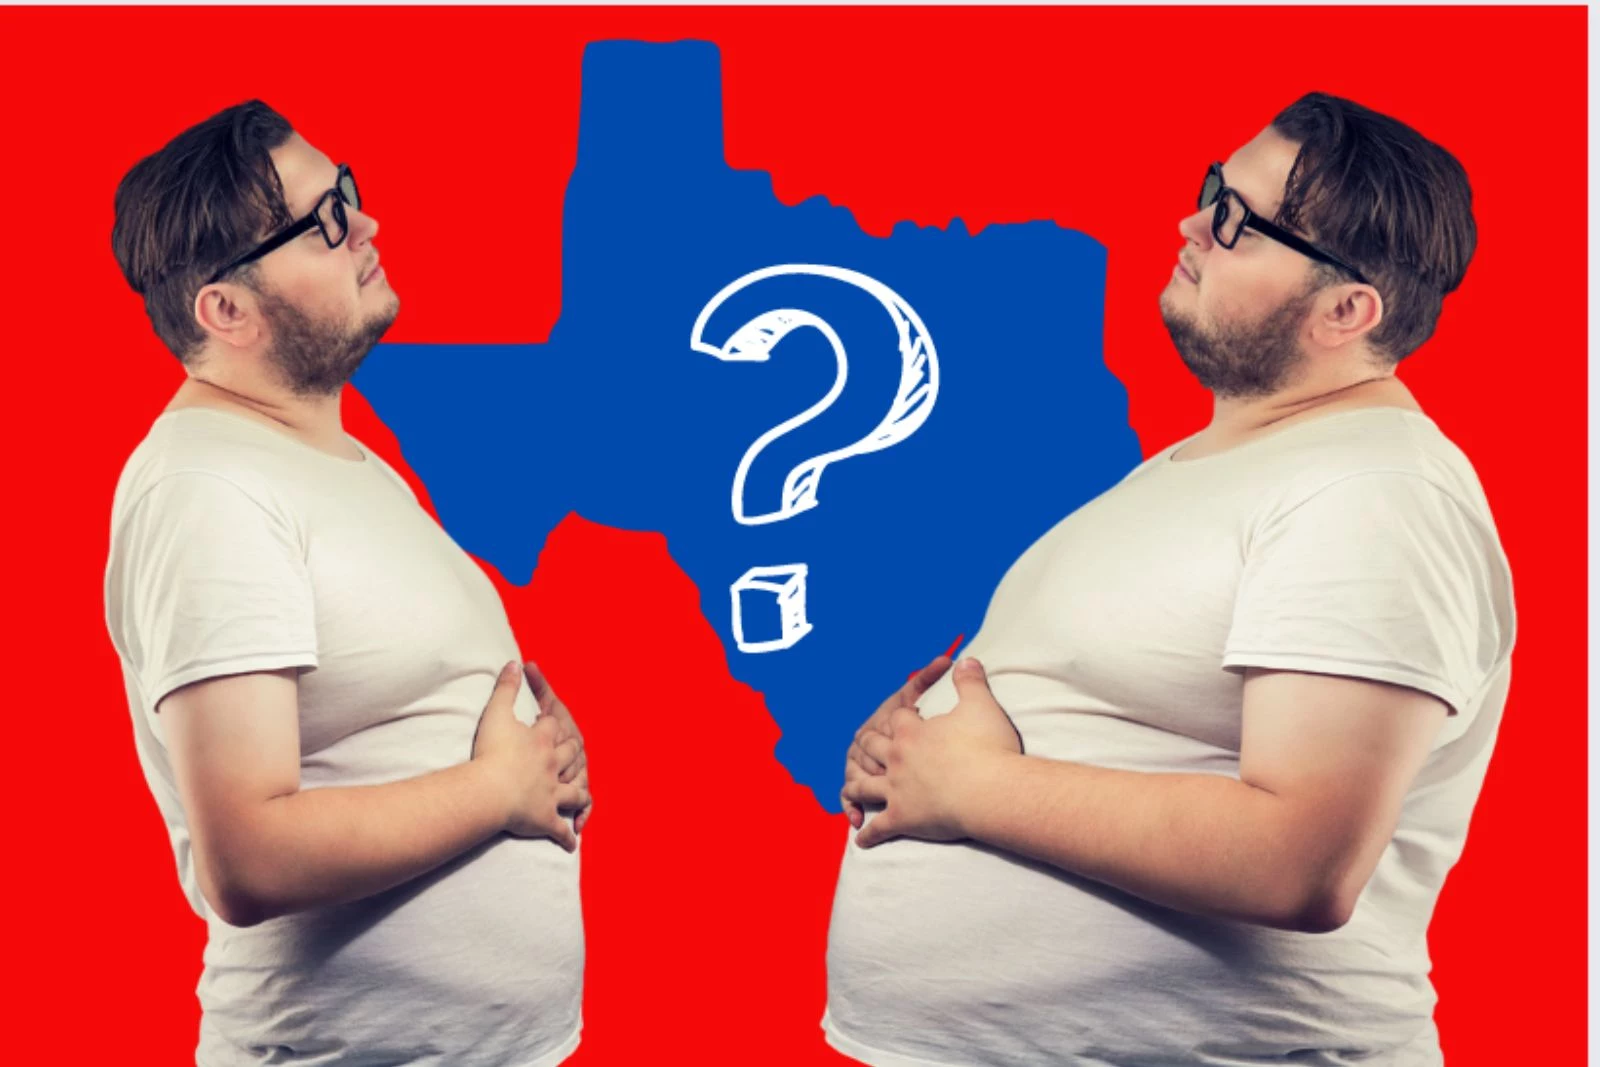 McAllen, Texas Tops the List for Most Obese in the U.S.